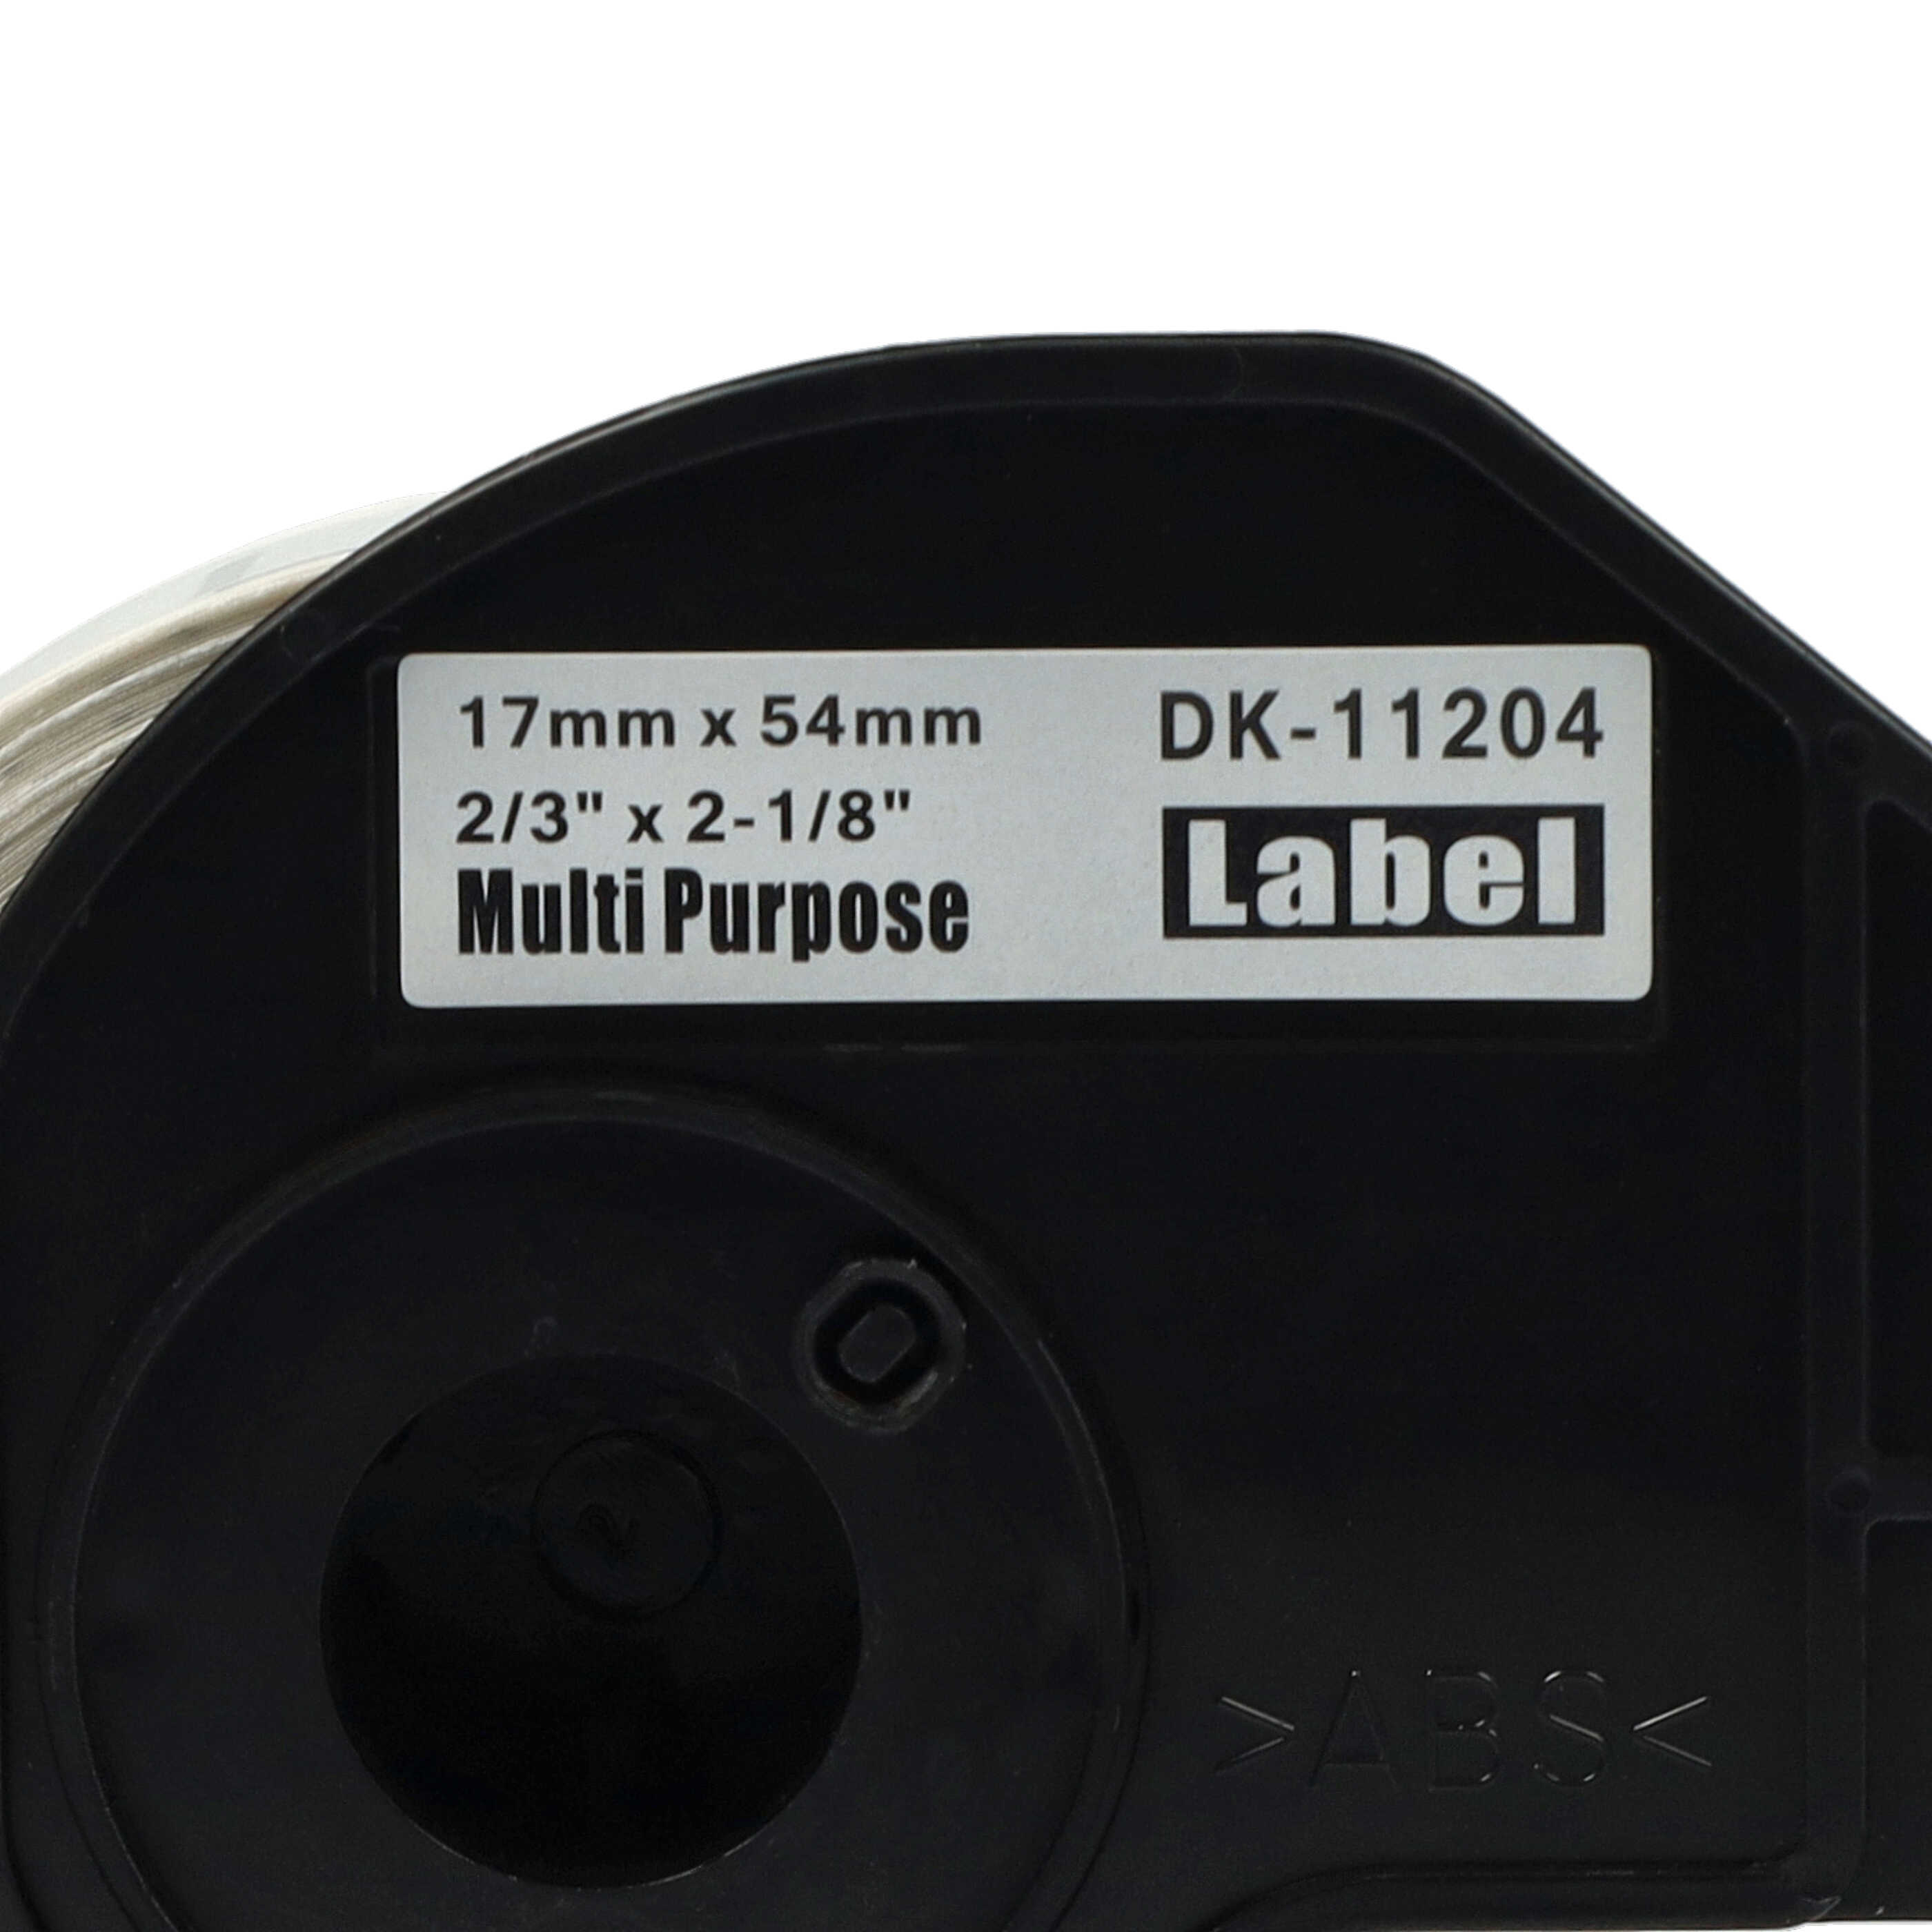 10x Labels replaces Brother DK-11204 for Labeller - 17 mm x 54 mm + Holder